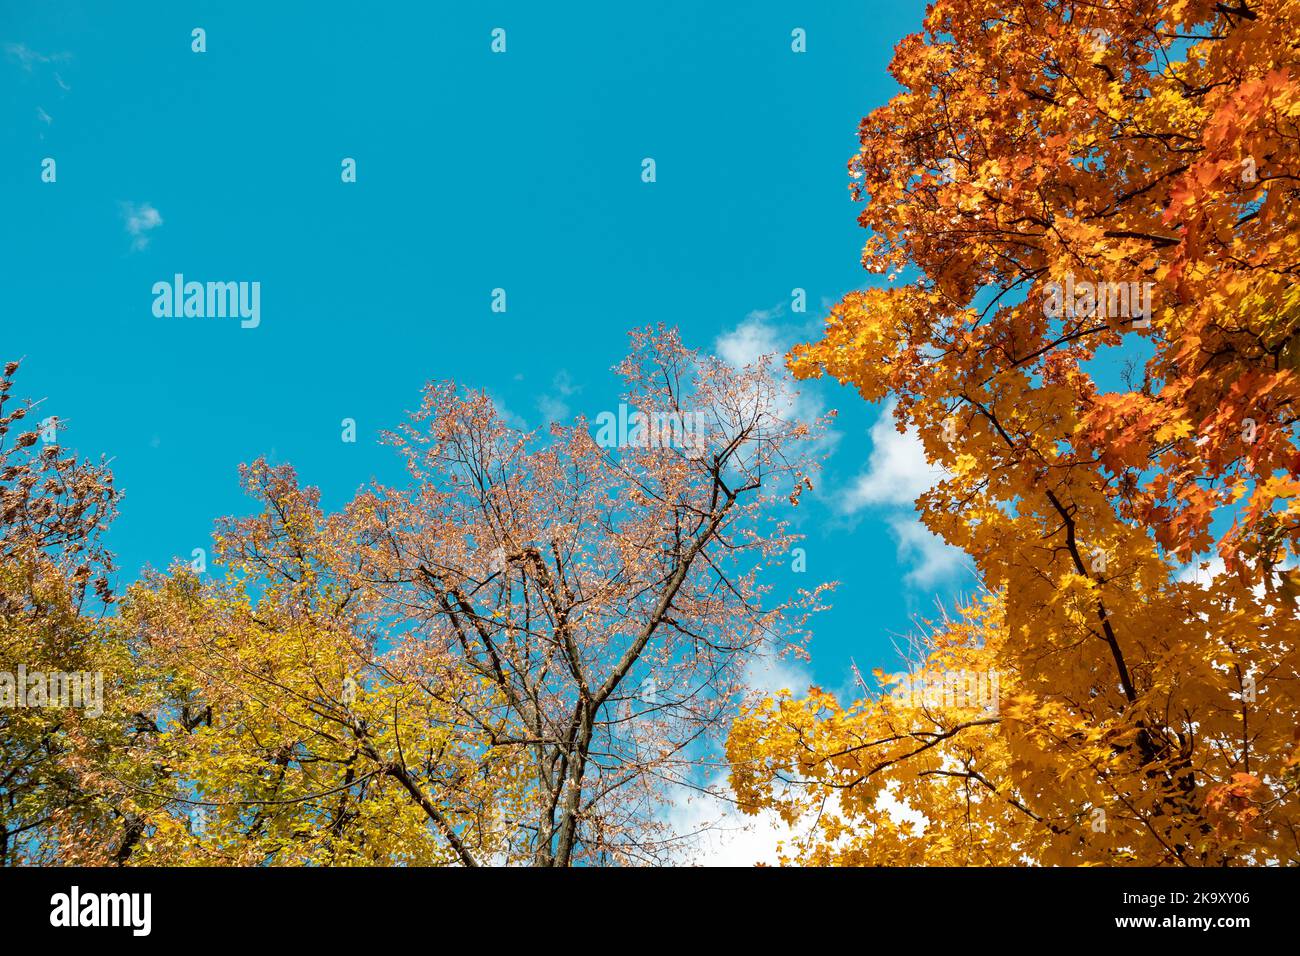 Autumn golden season look up. Maple tree branches with yellow leaves on blue sky with clouds, autumnal natural forest background Stock Photo